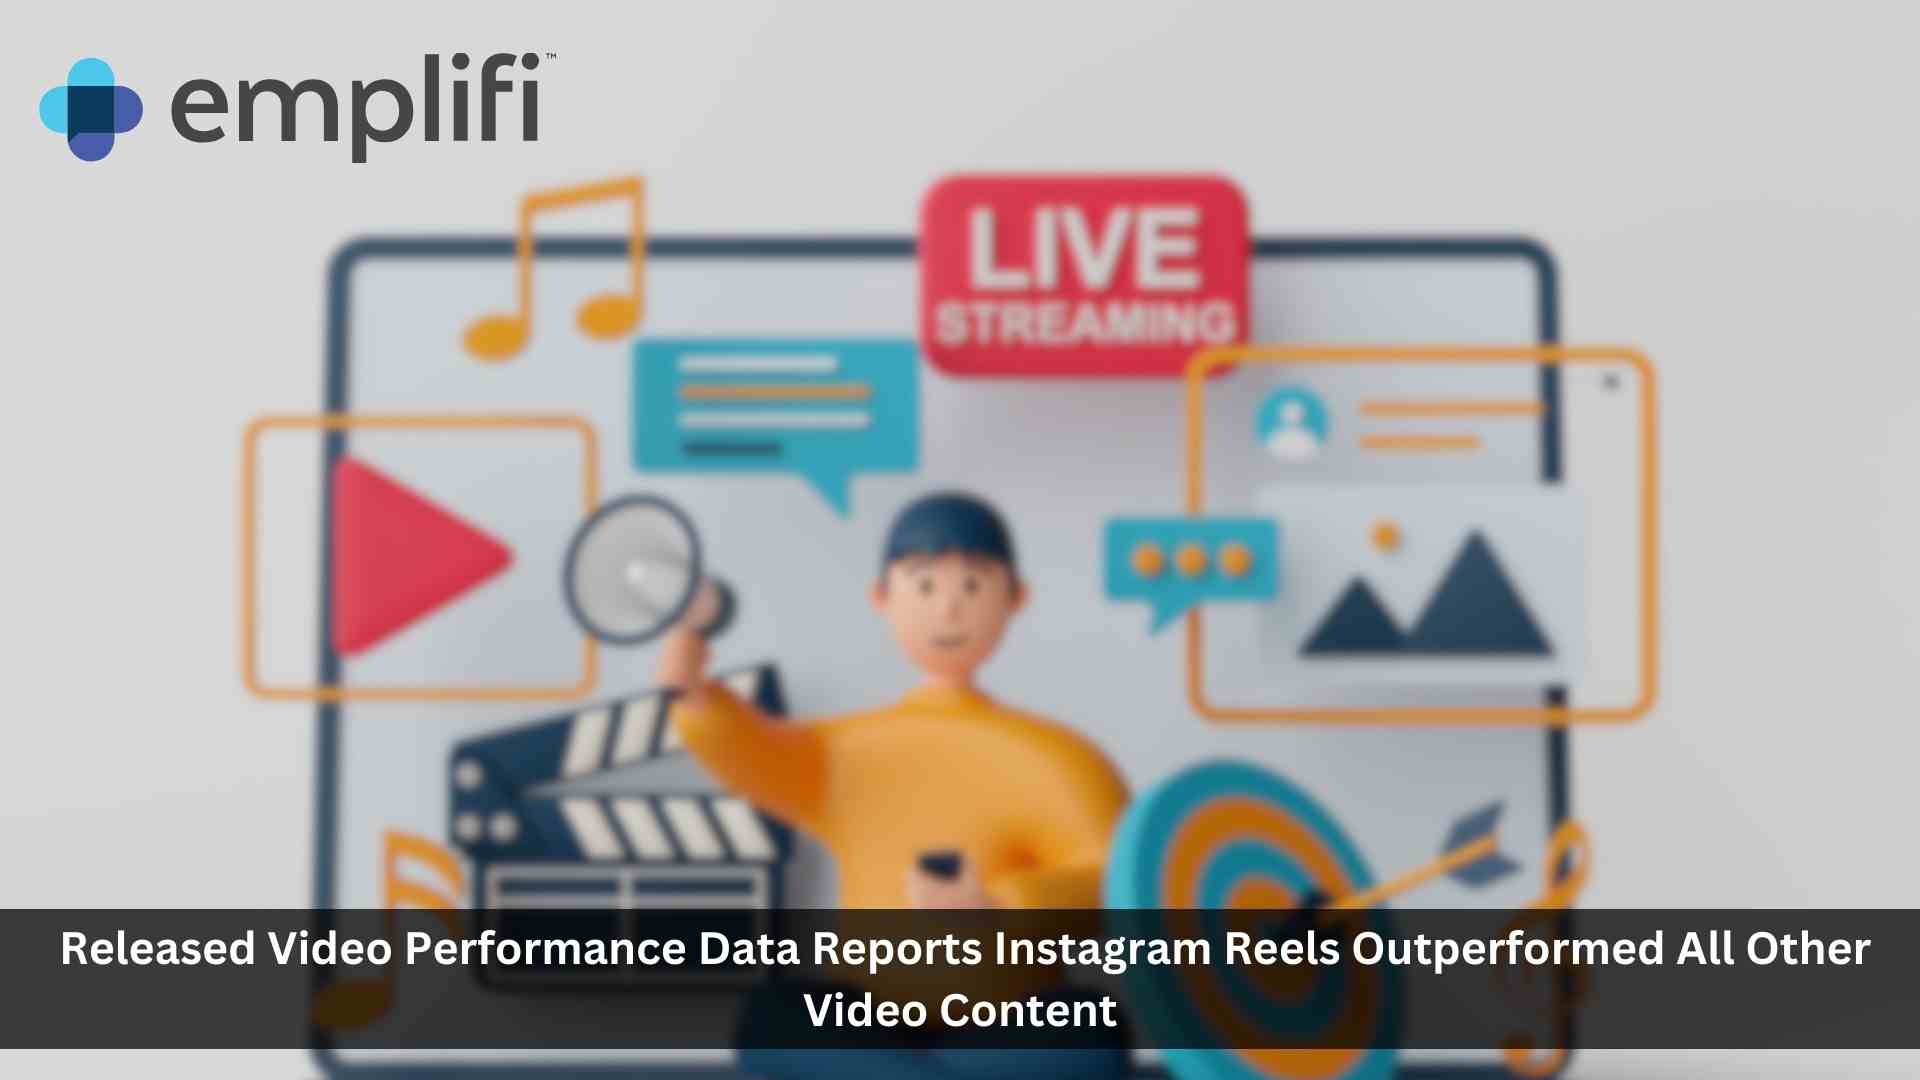 Emplifi Reports Instagram Reels Outperformed All Other Video Content Across Instagram, Facebook, and TikTok